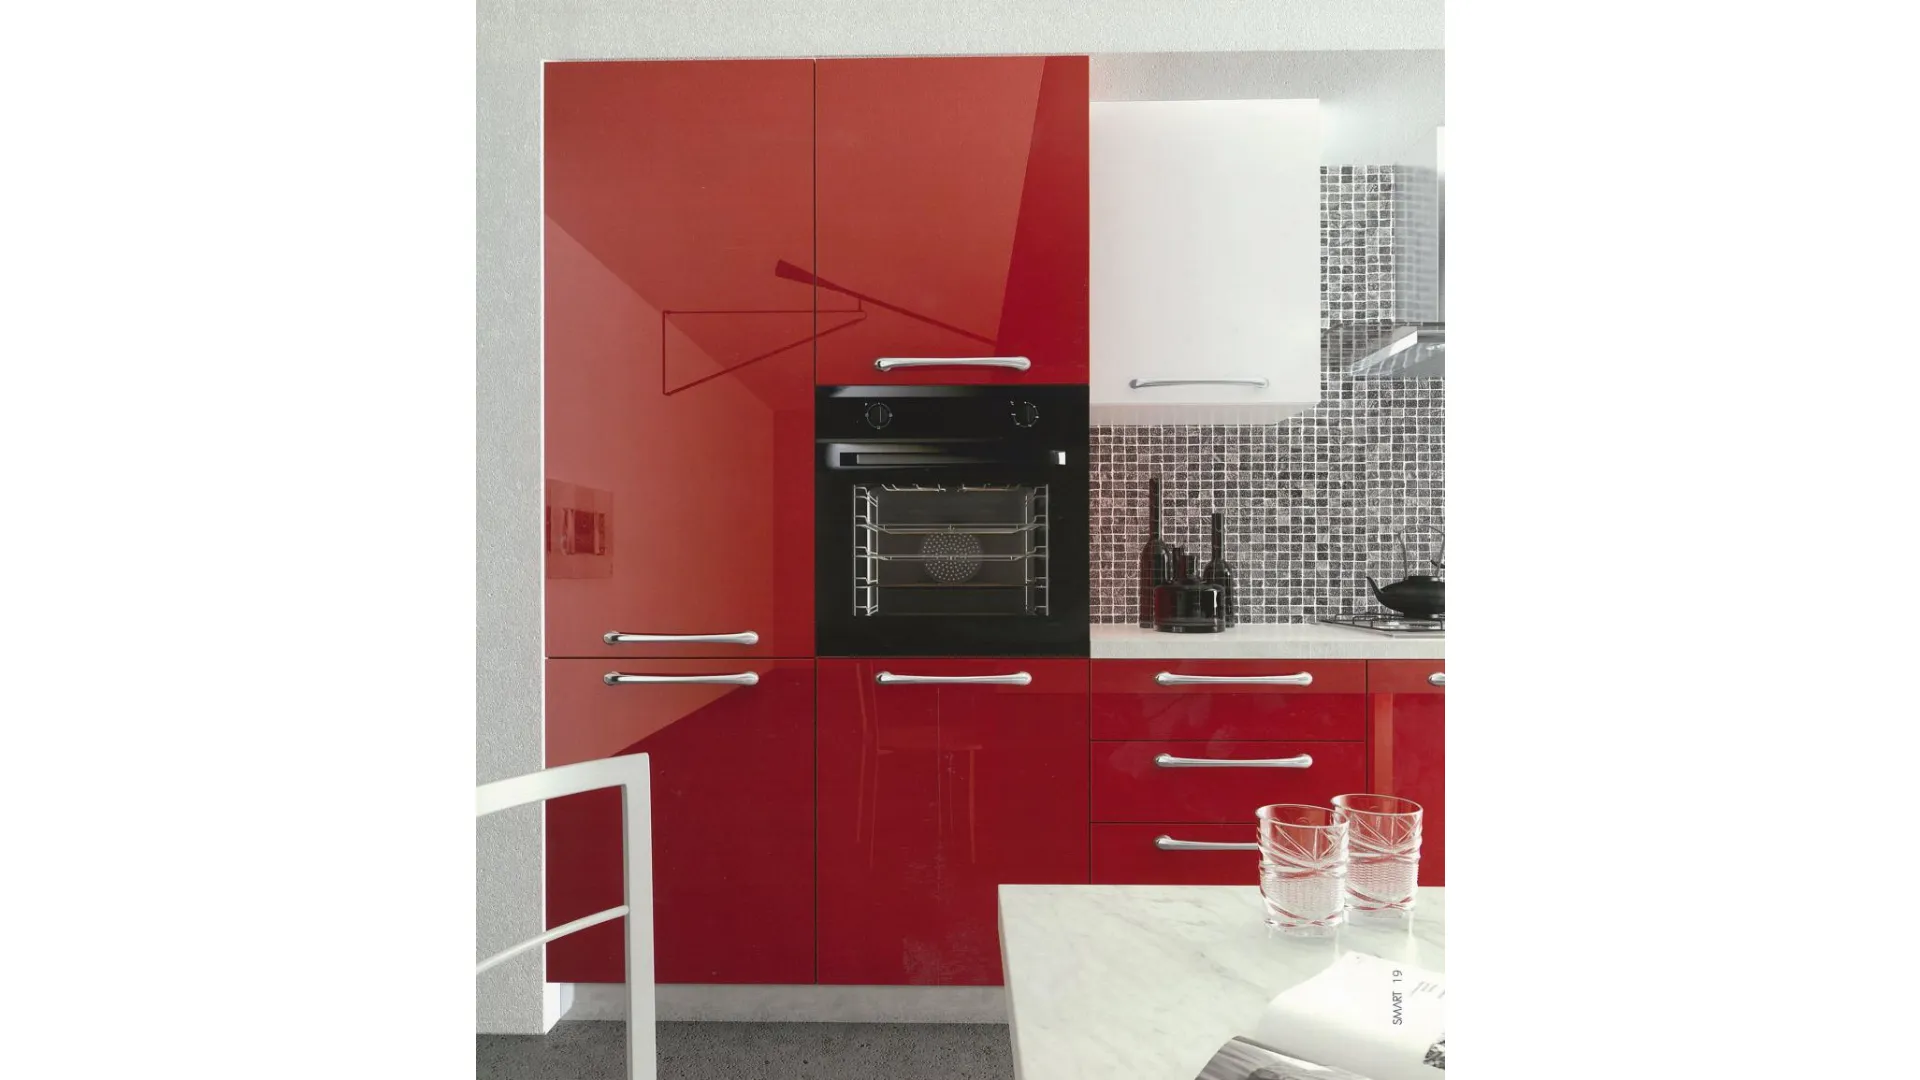 Modern kitchen of the Mottes Mobili Vicenza collection.